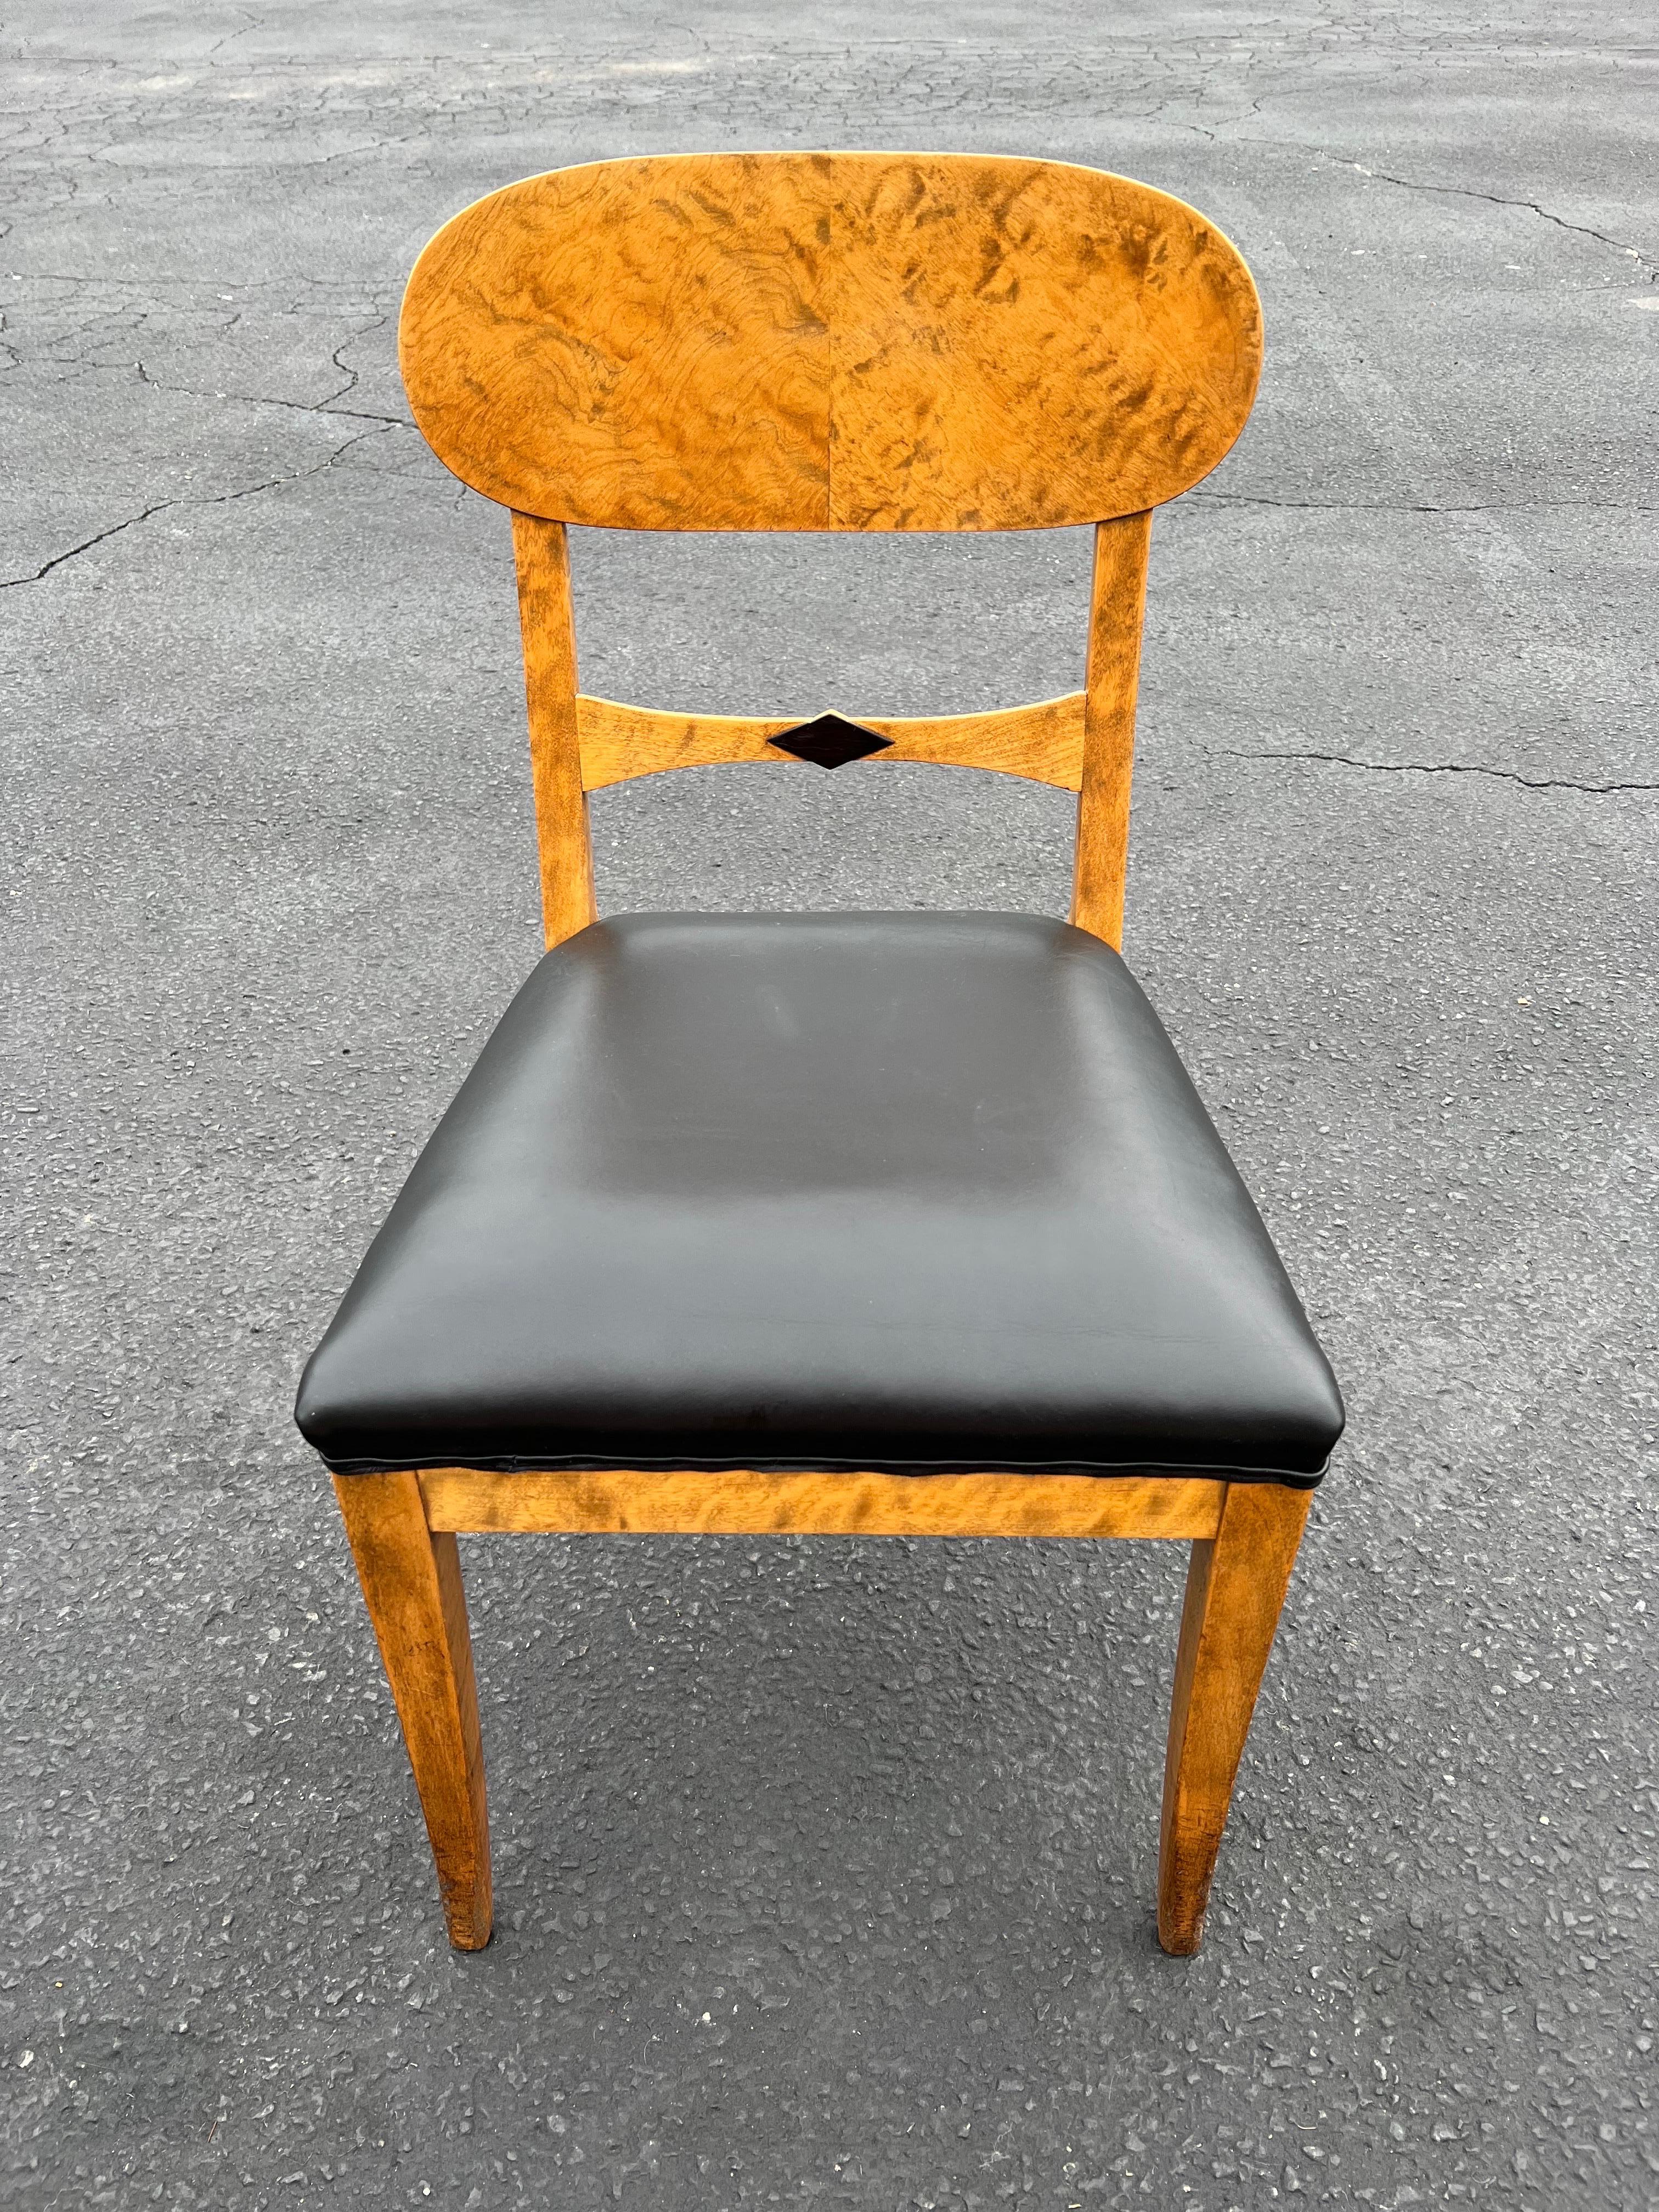 Birds eye maple Biedermeier style chair. Iconic design chair with an art deco feel. Perfect for that desk that needs a single chair or use as a side chair. Gorgeous just to look at ! Sturdy and in very good condition. Attributed to Josef Danhauser.